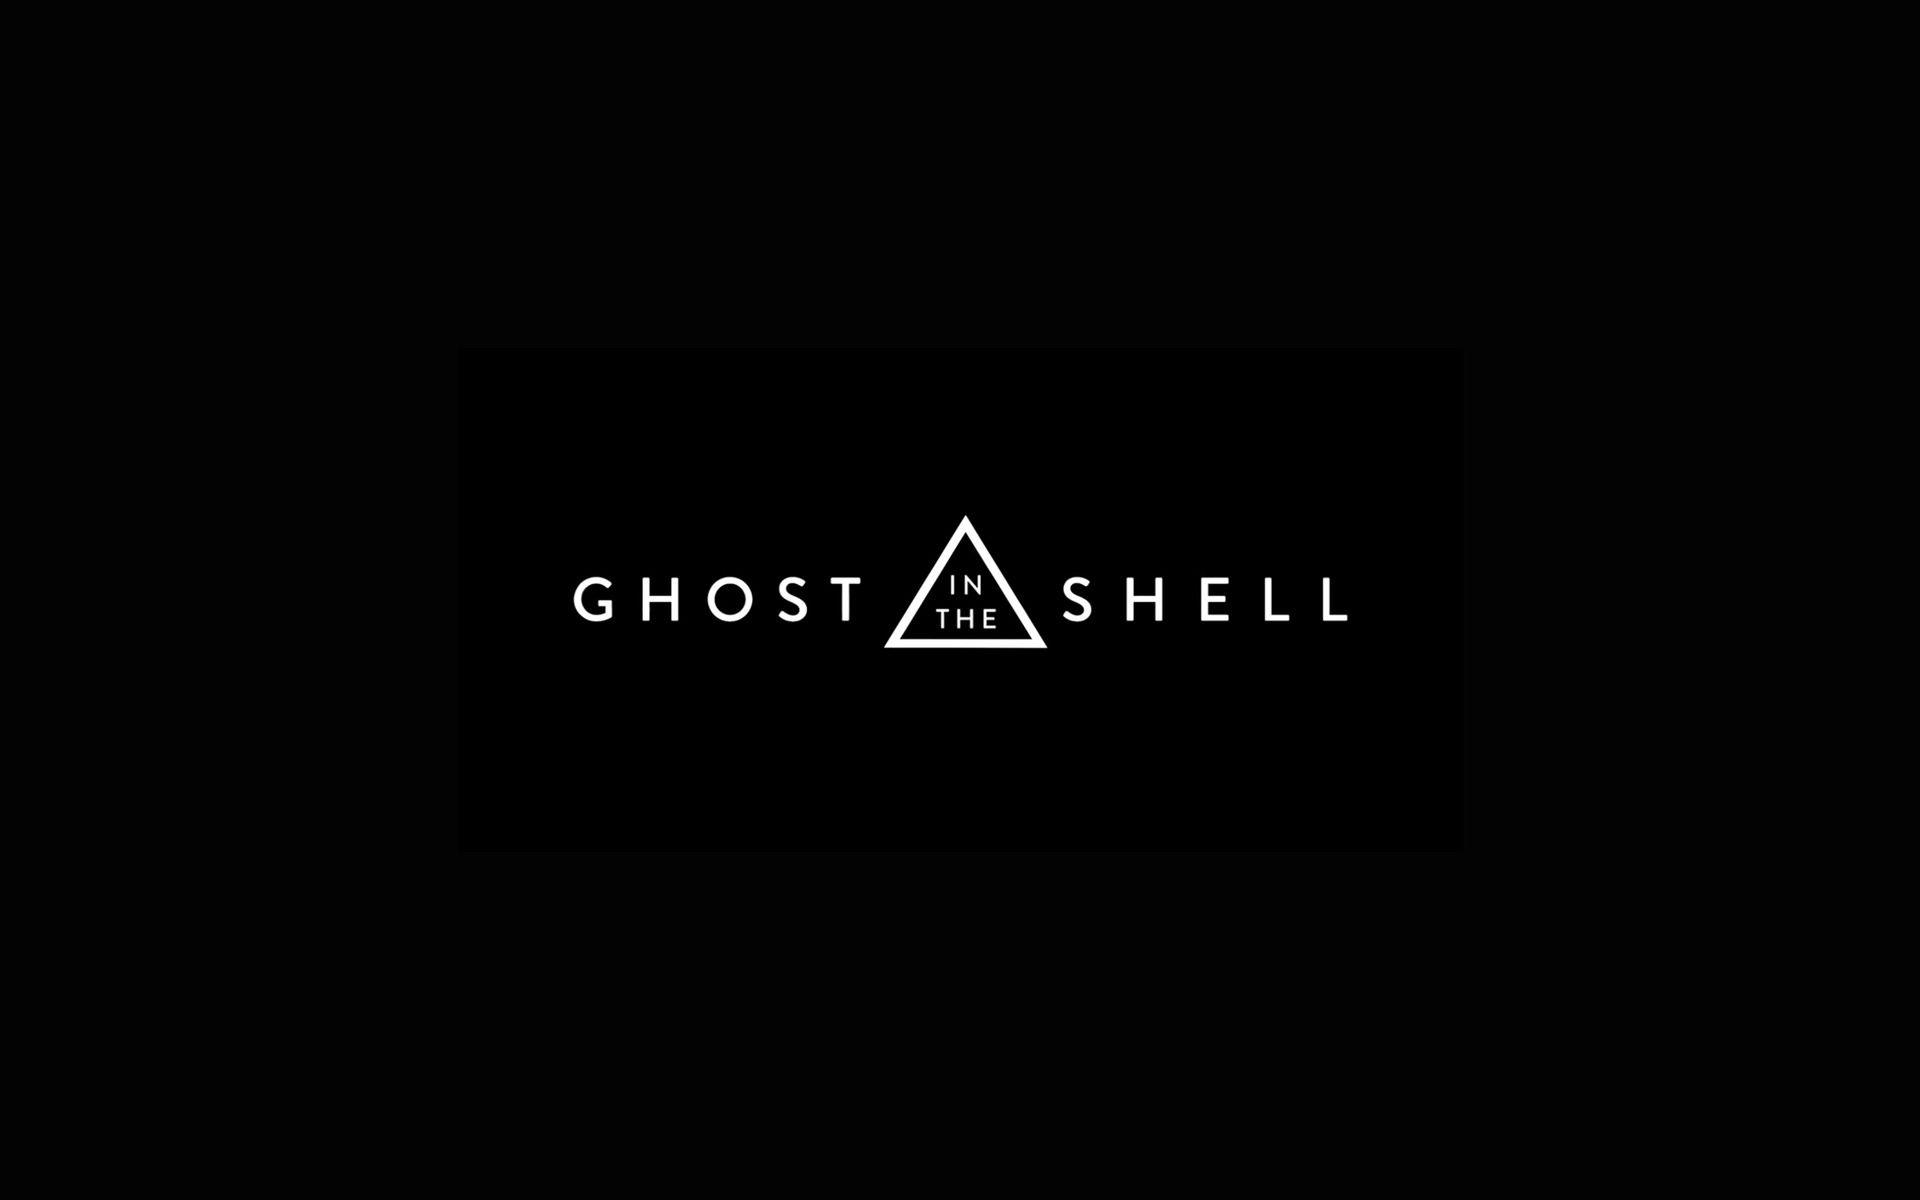 Triangle Movie Logo - Ghost In The Shell Movie Logo 1080P Resolution HD 4k